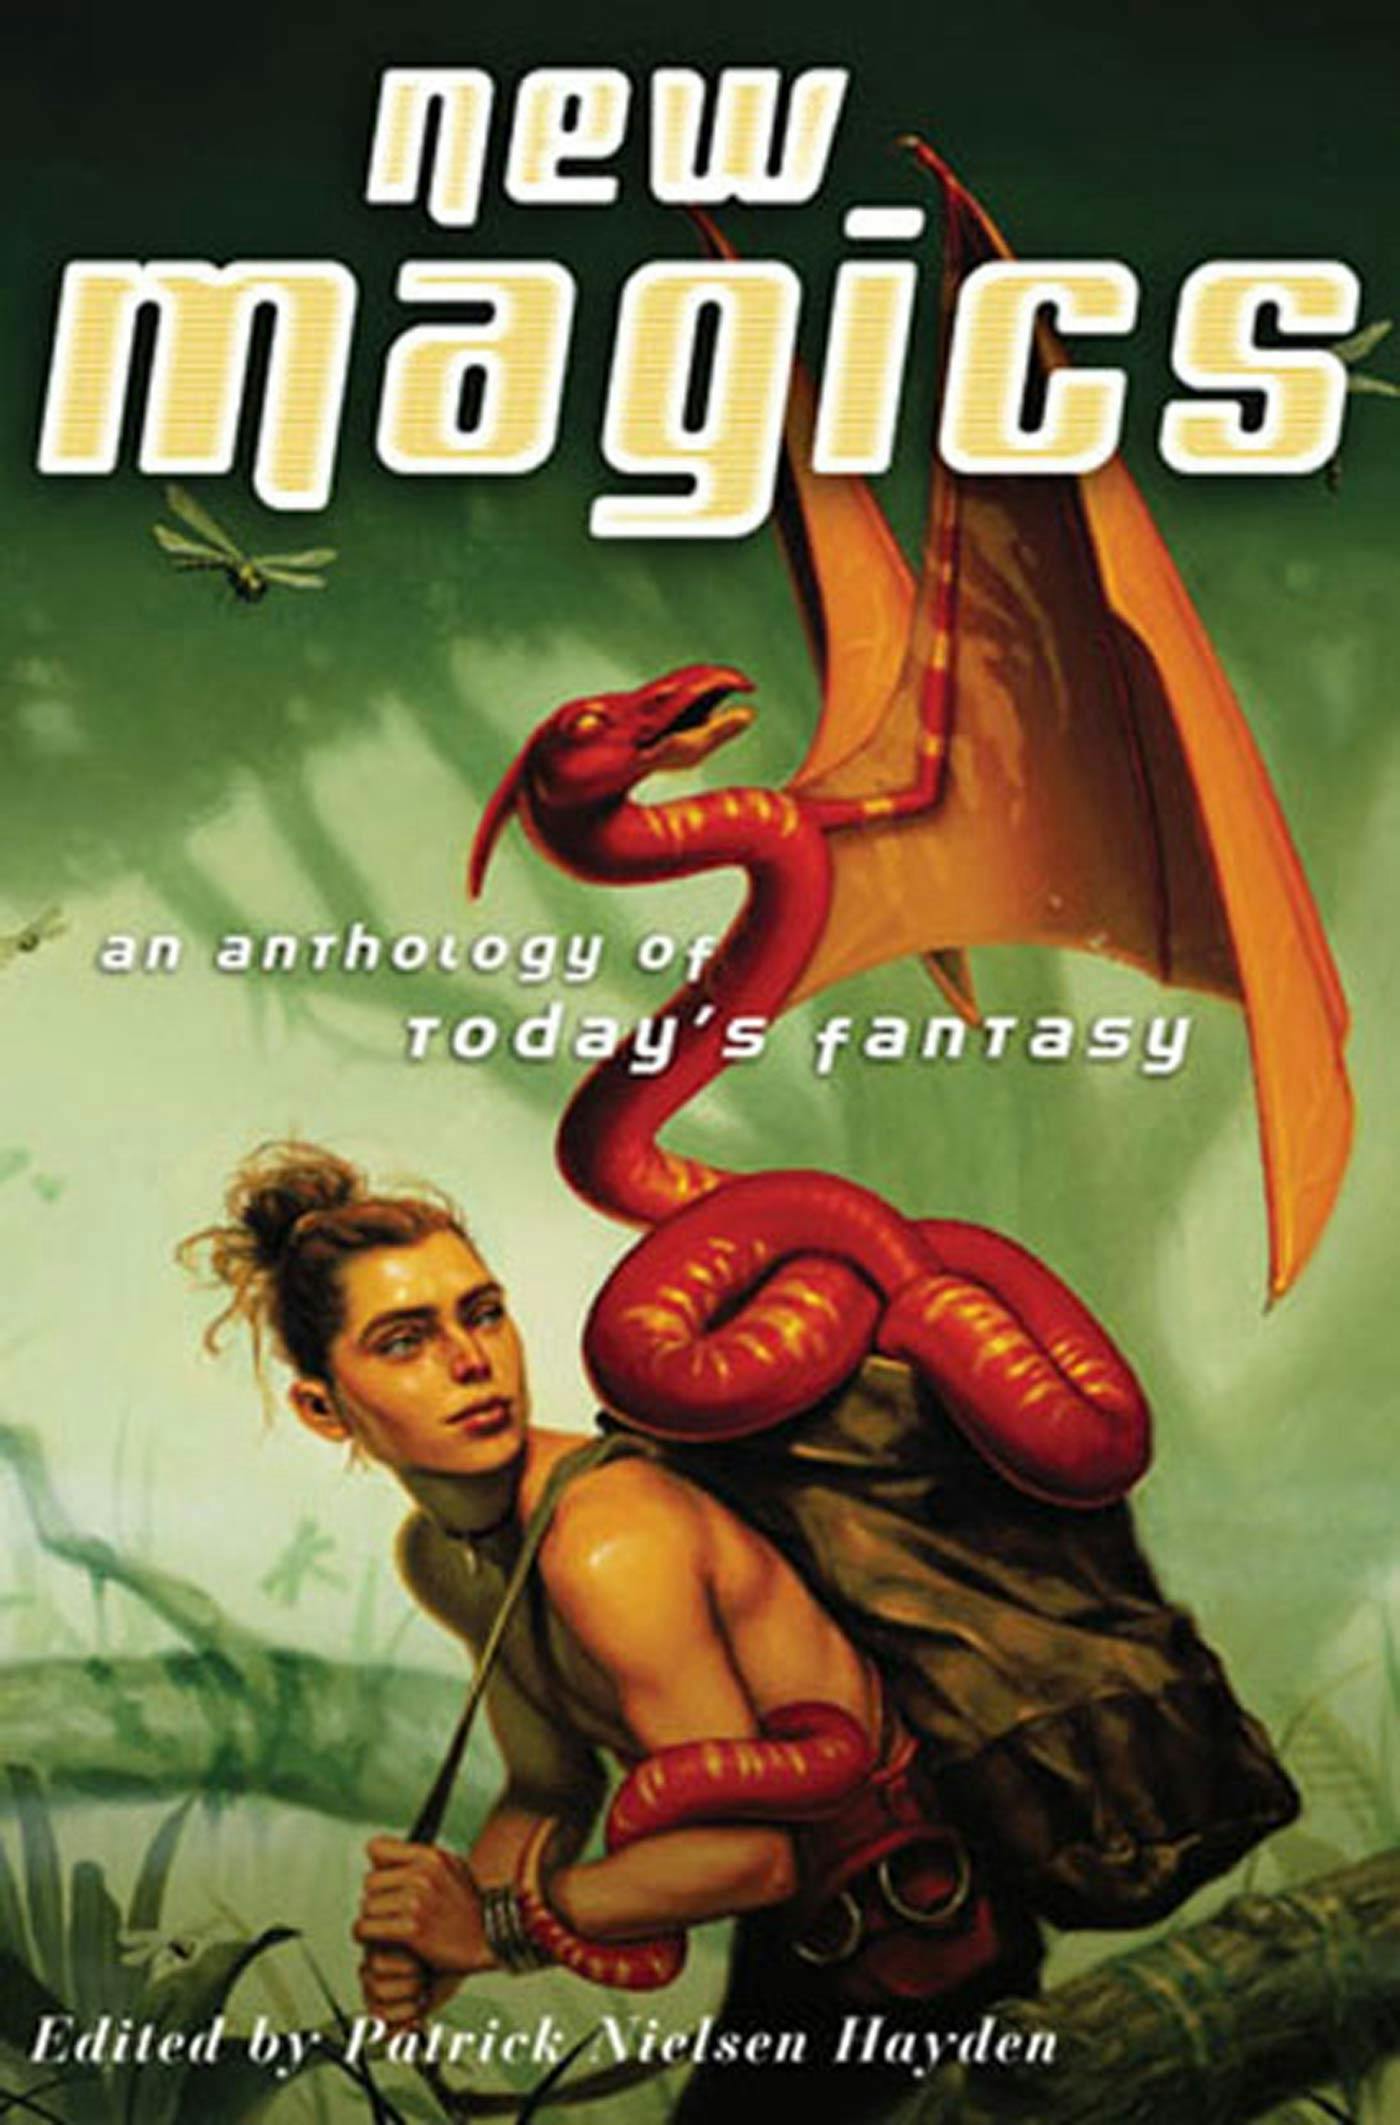 Cover for the book titled as: New Magics